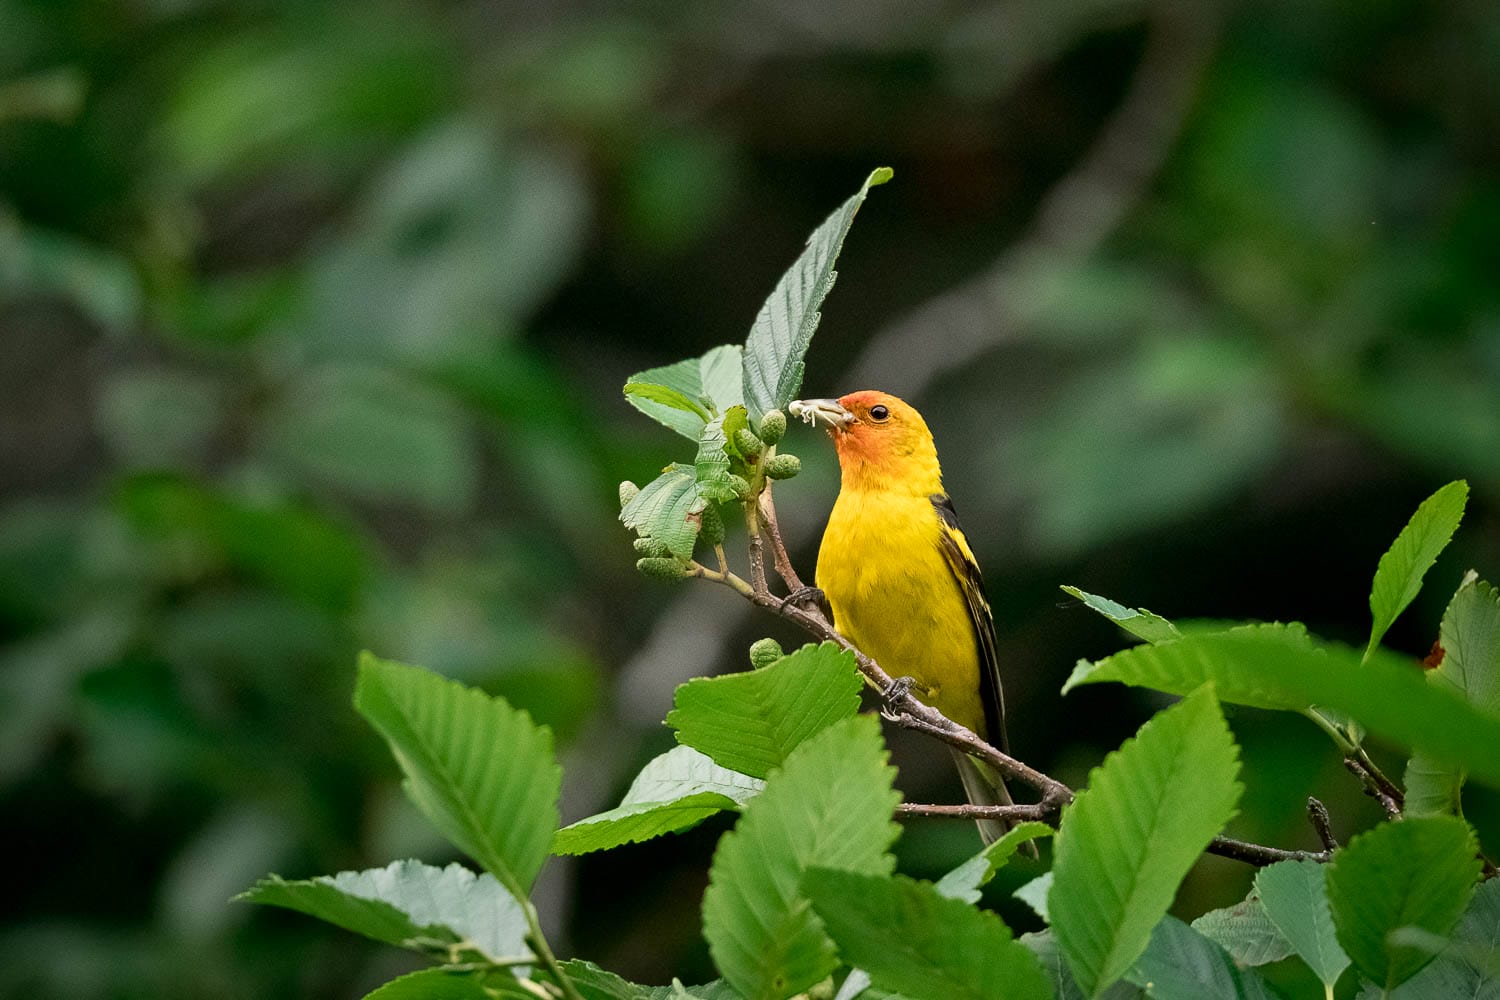 A western taninger bird perched on a branch among green leaves.